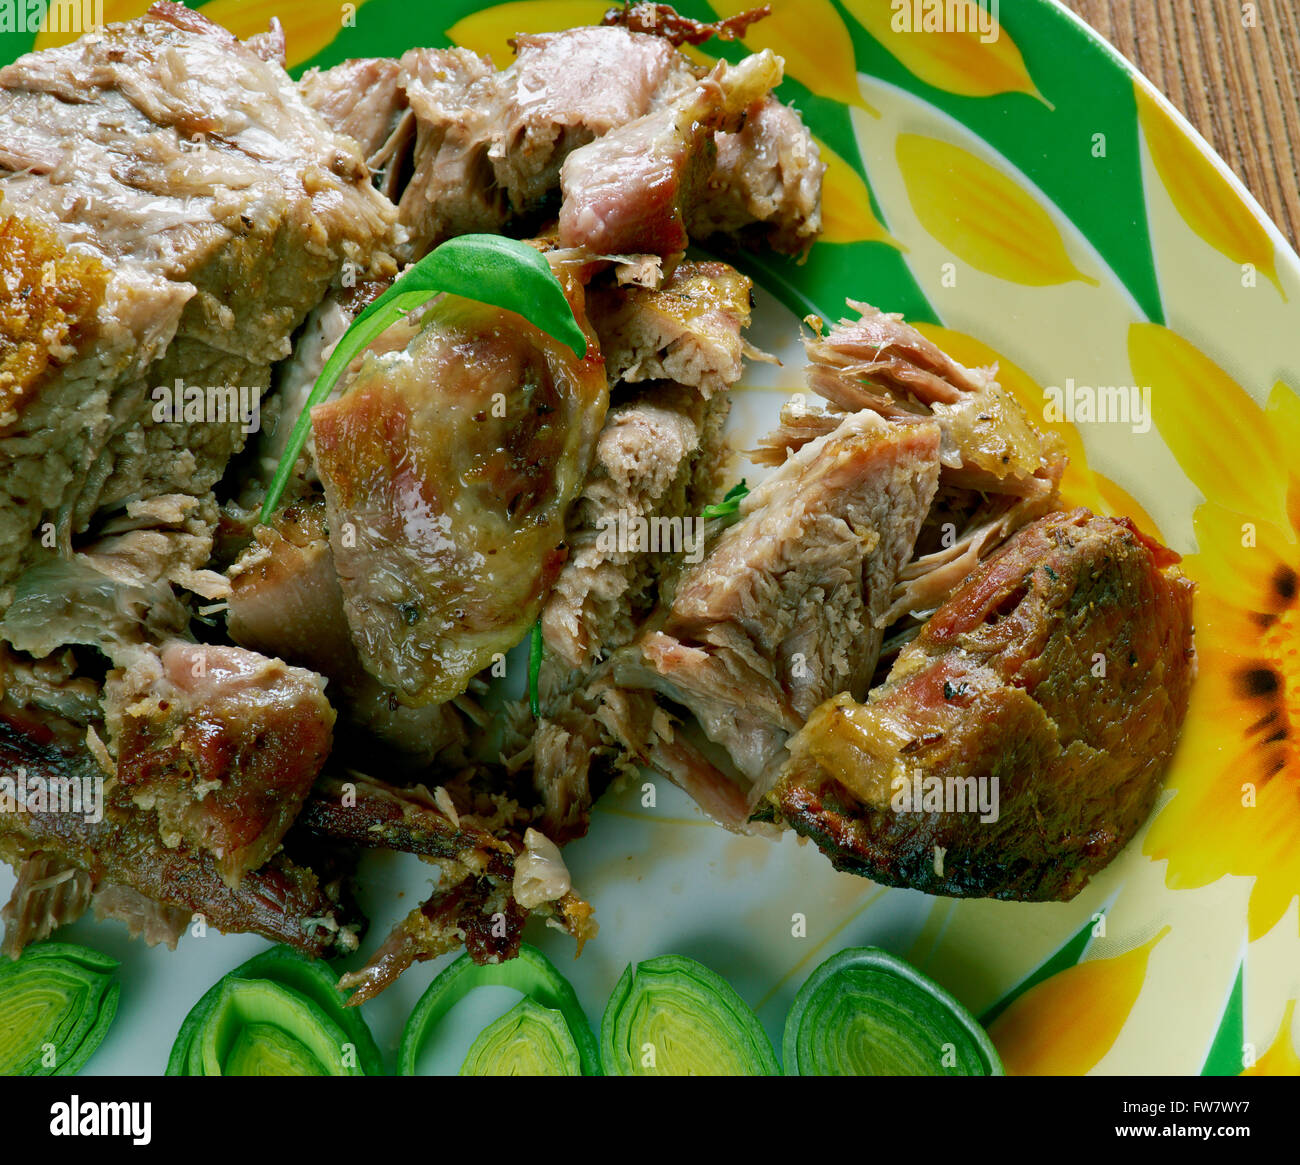 Pork braised in Milk and  Fresh Herbs -  Maiale al Latte.San Marino and Italy Dish. Stock Photo